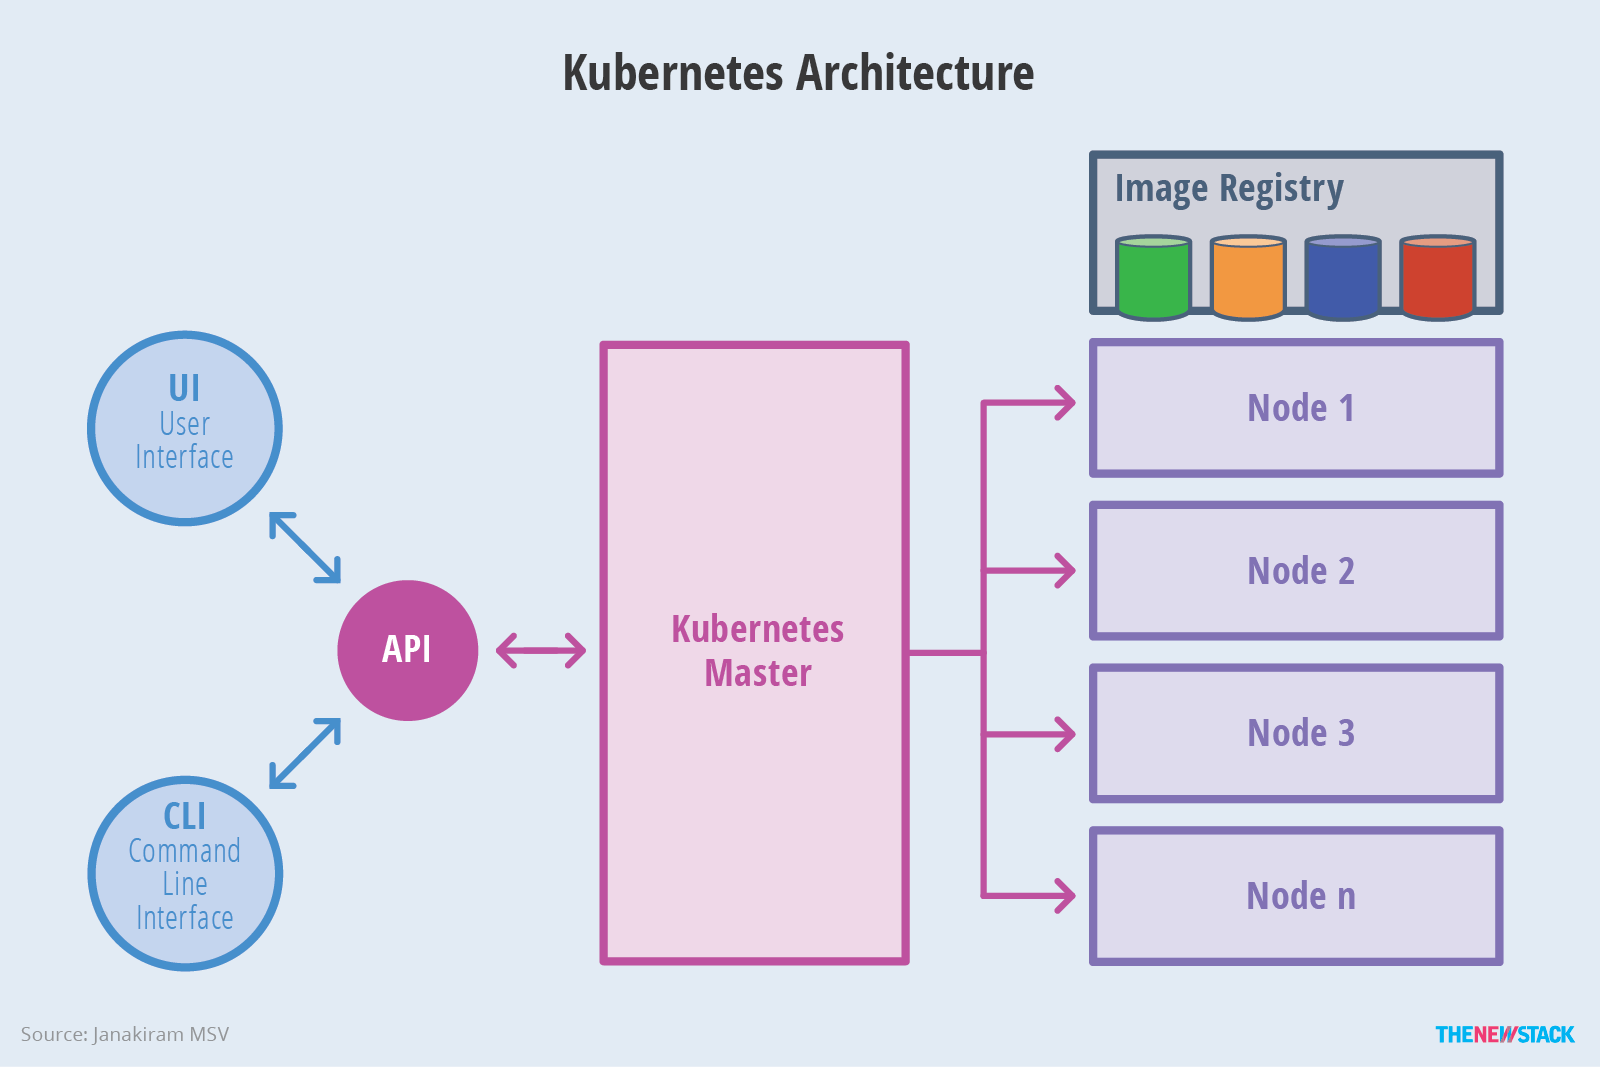 k8s-architecture.png